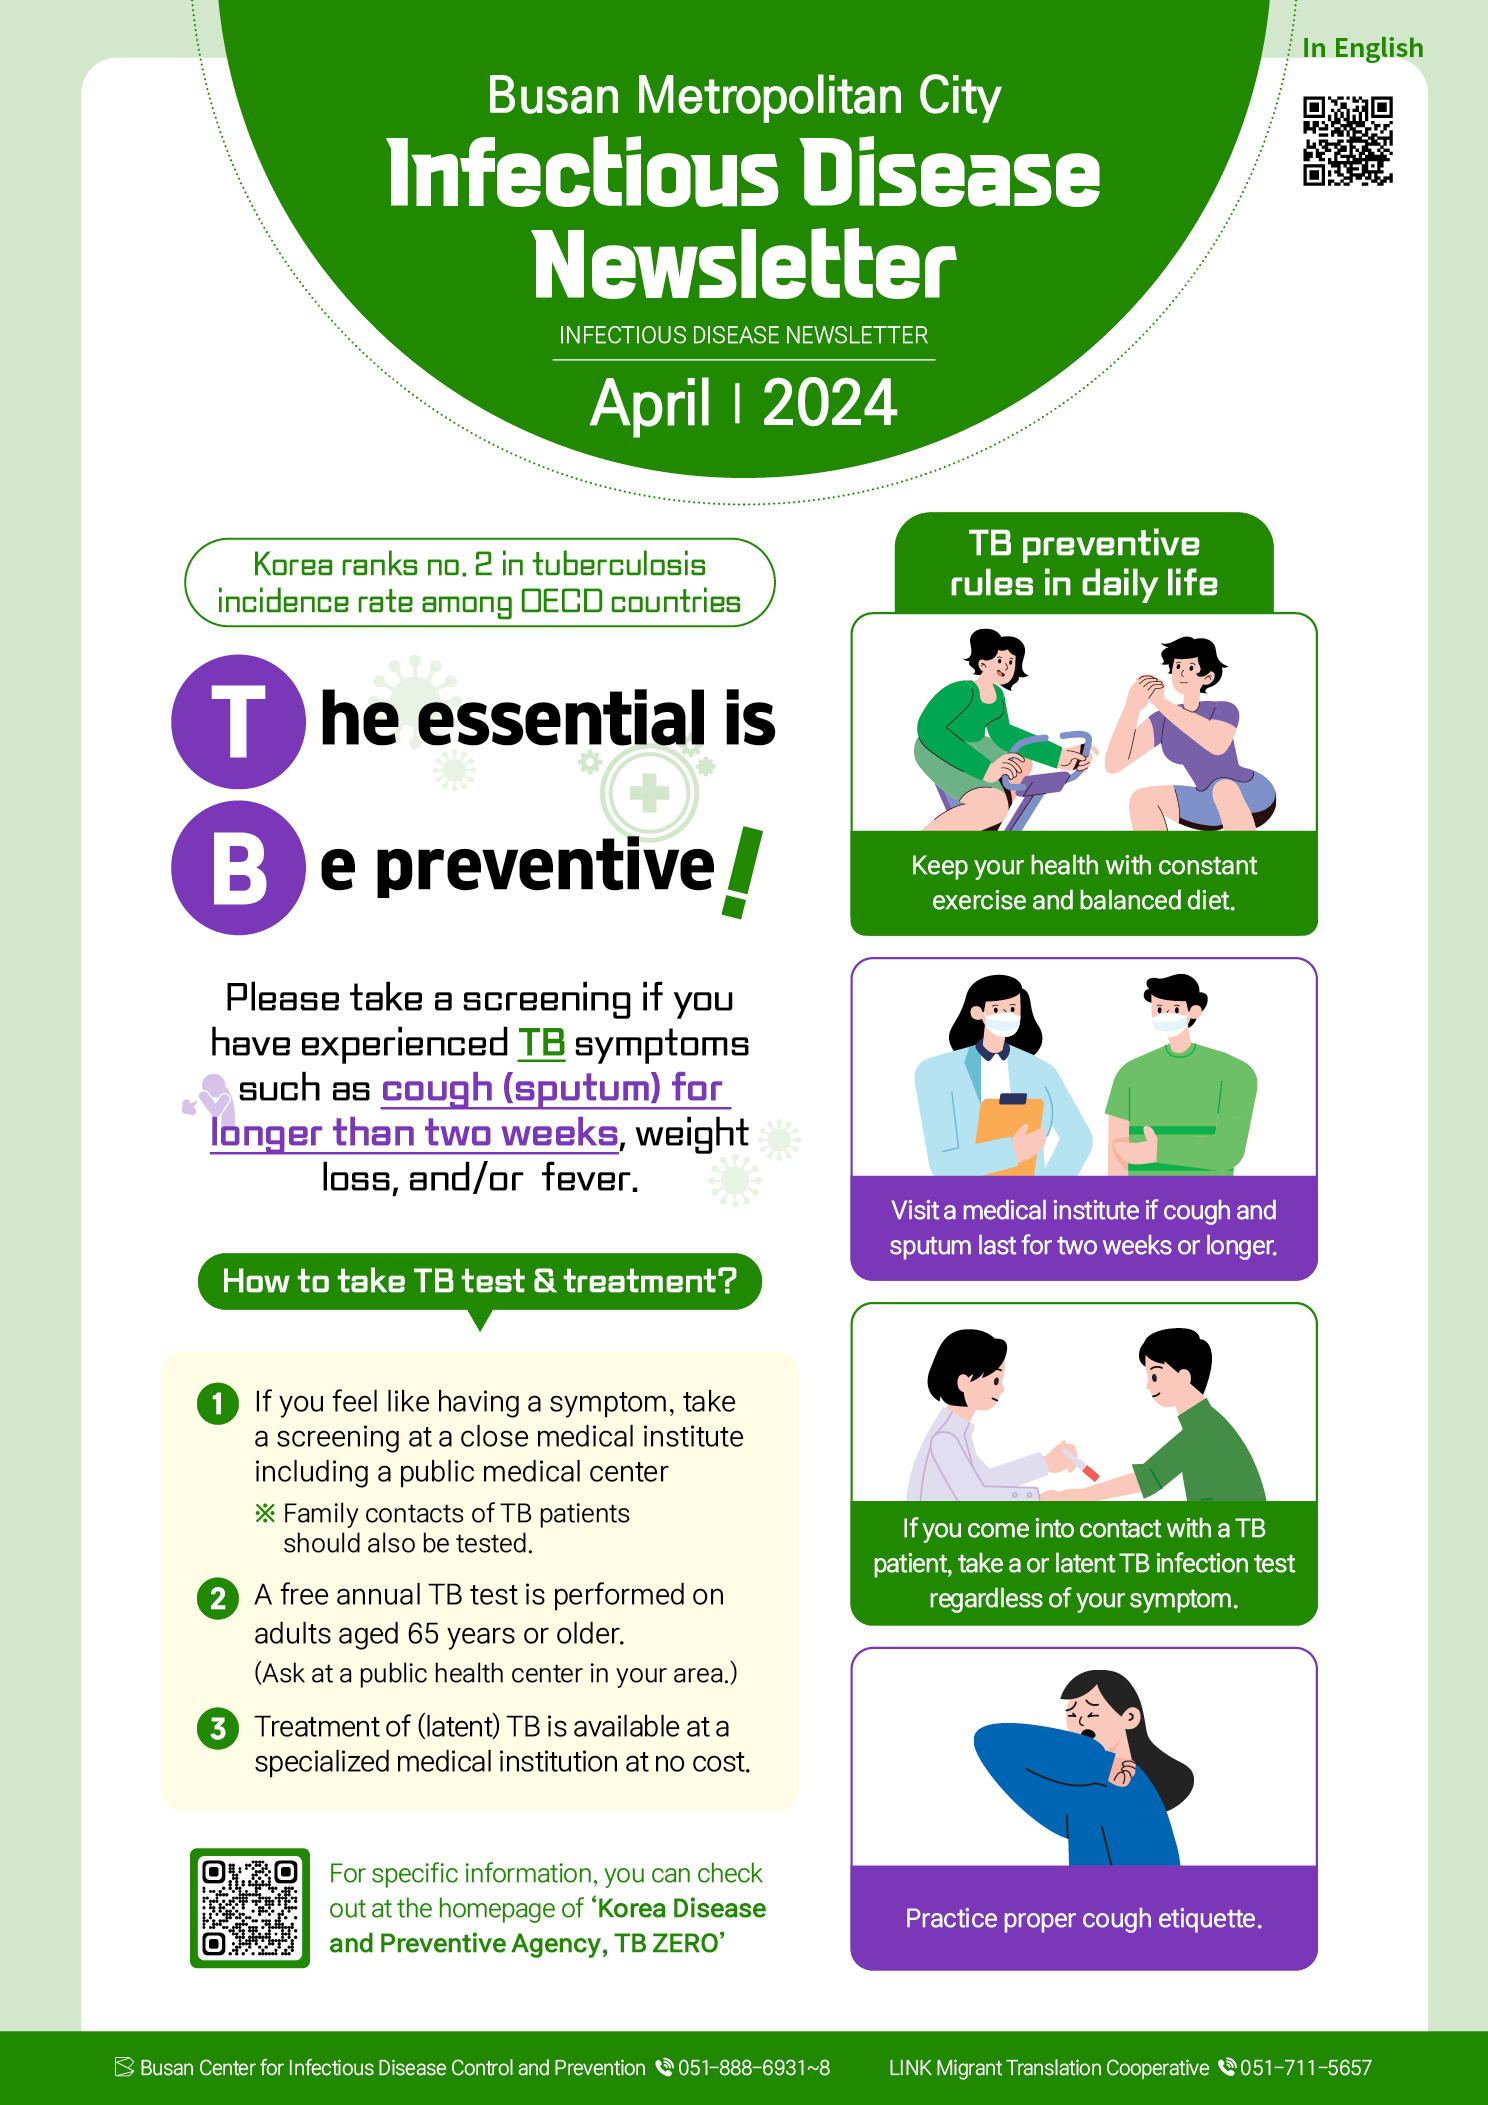 Infectious Disease Newsletter (Apr. 2024) in English